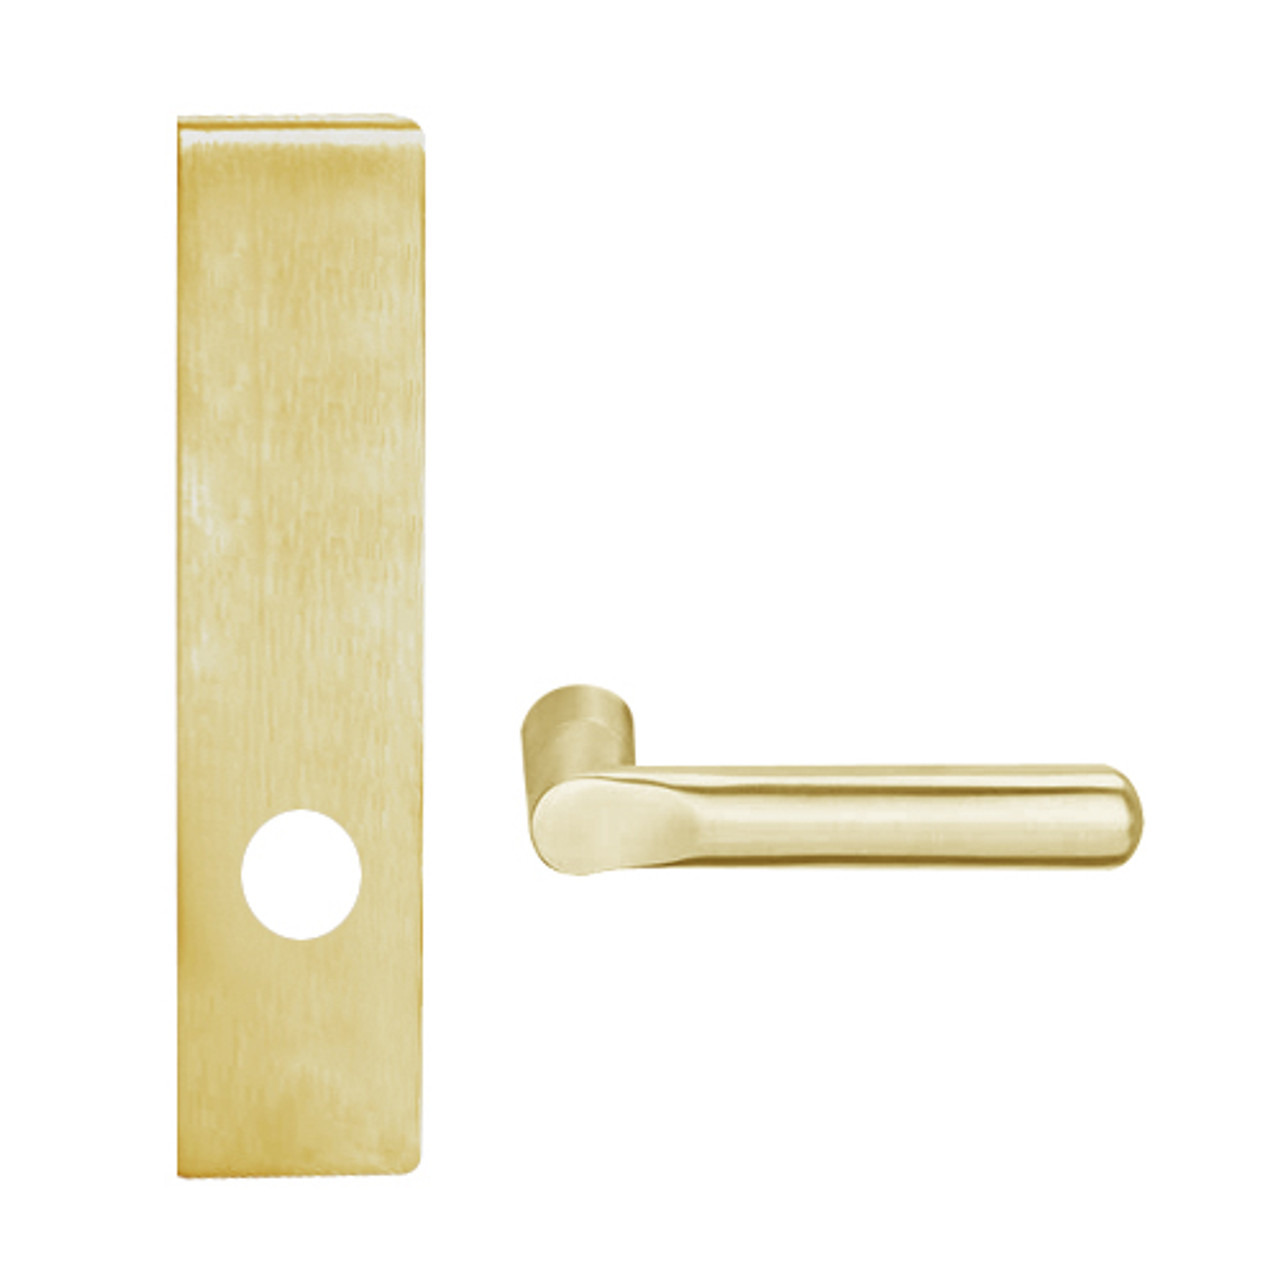 L9010-18L-605 Schlage L Series Passage Latch Commercial Mortise Lock with 18 Cast Lever Design in Bright Brass